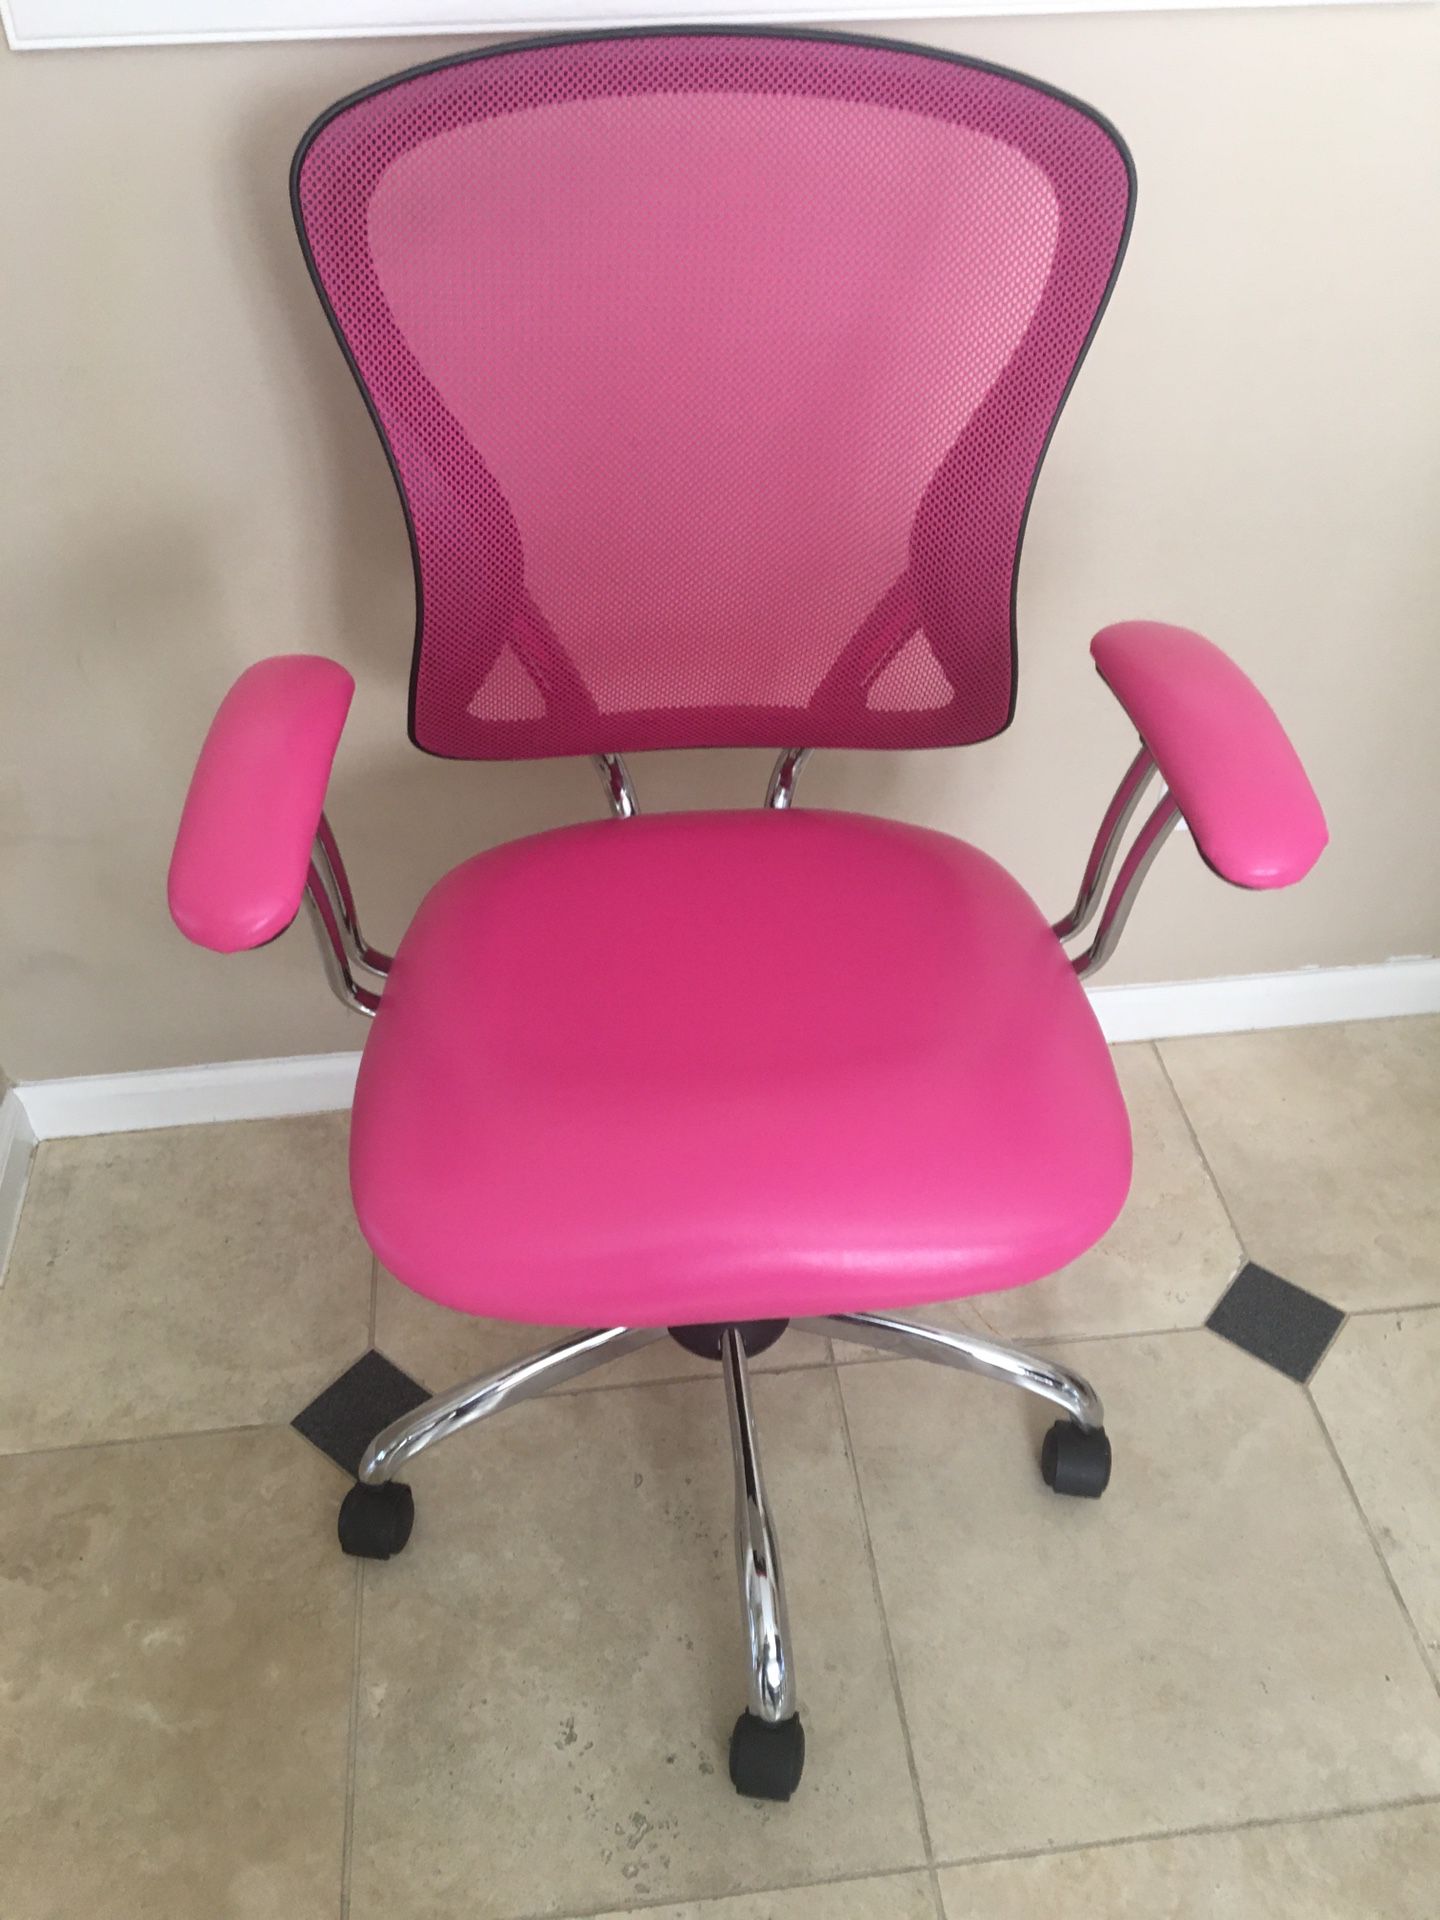 Super sassy pink office chair